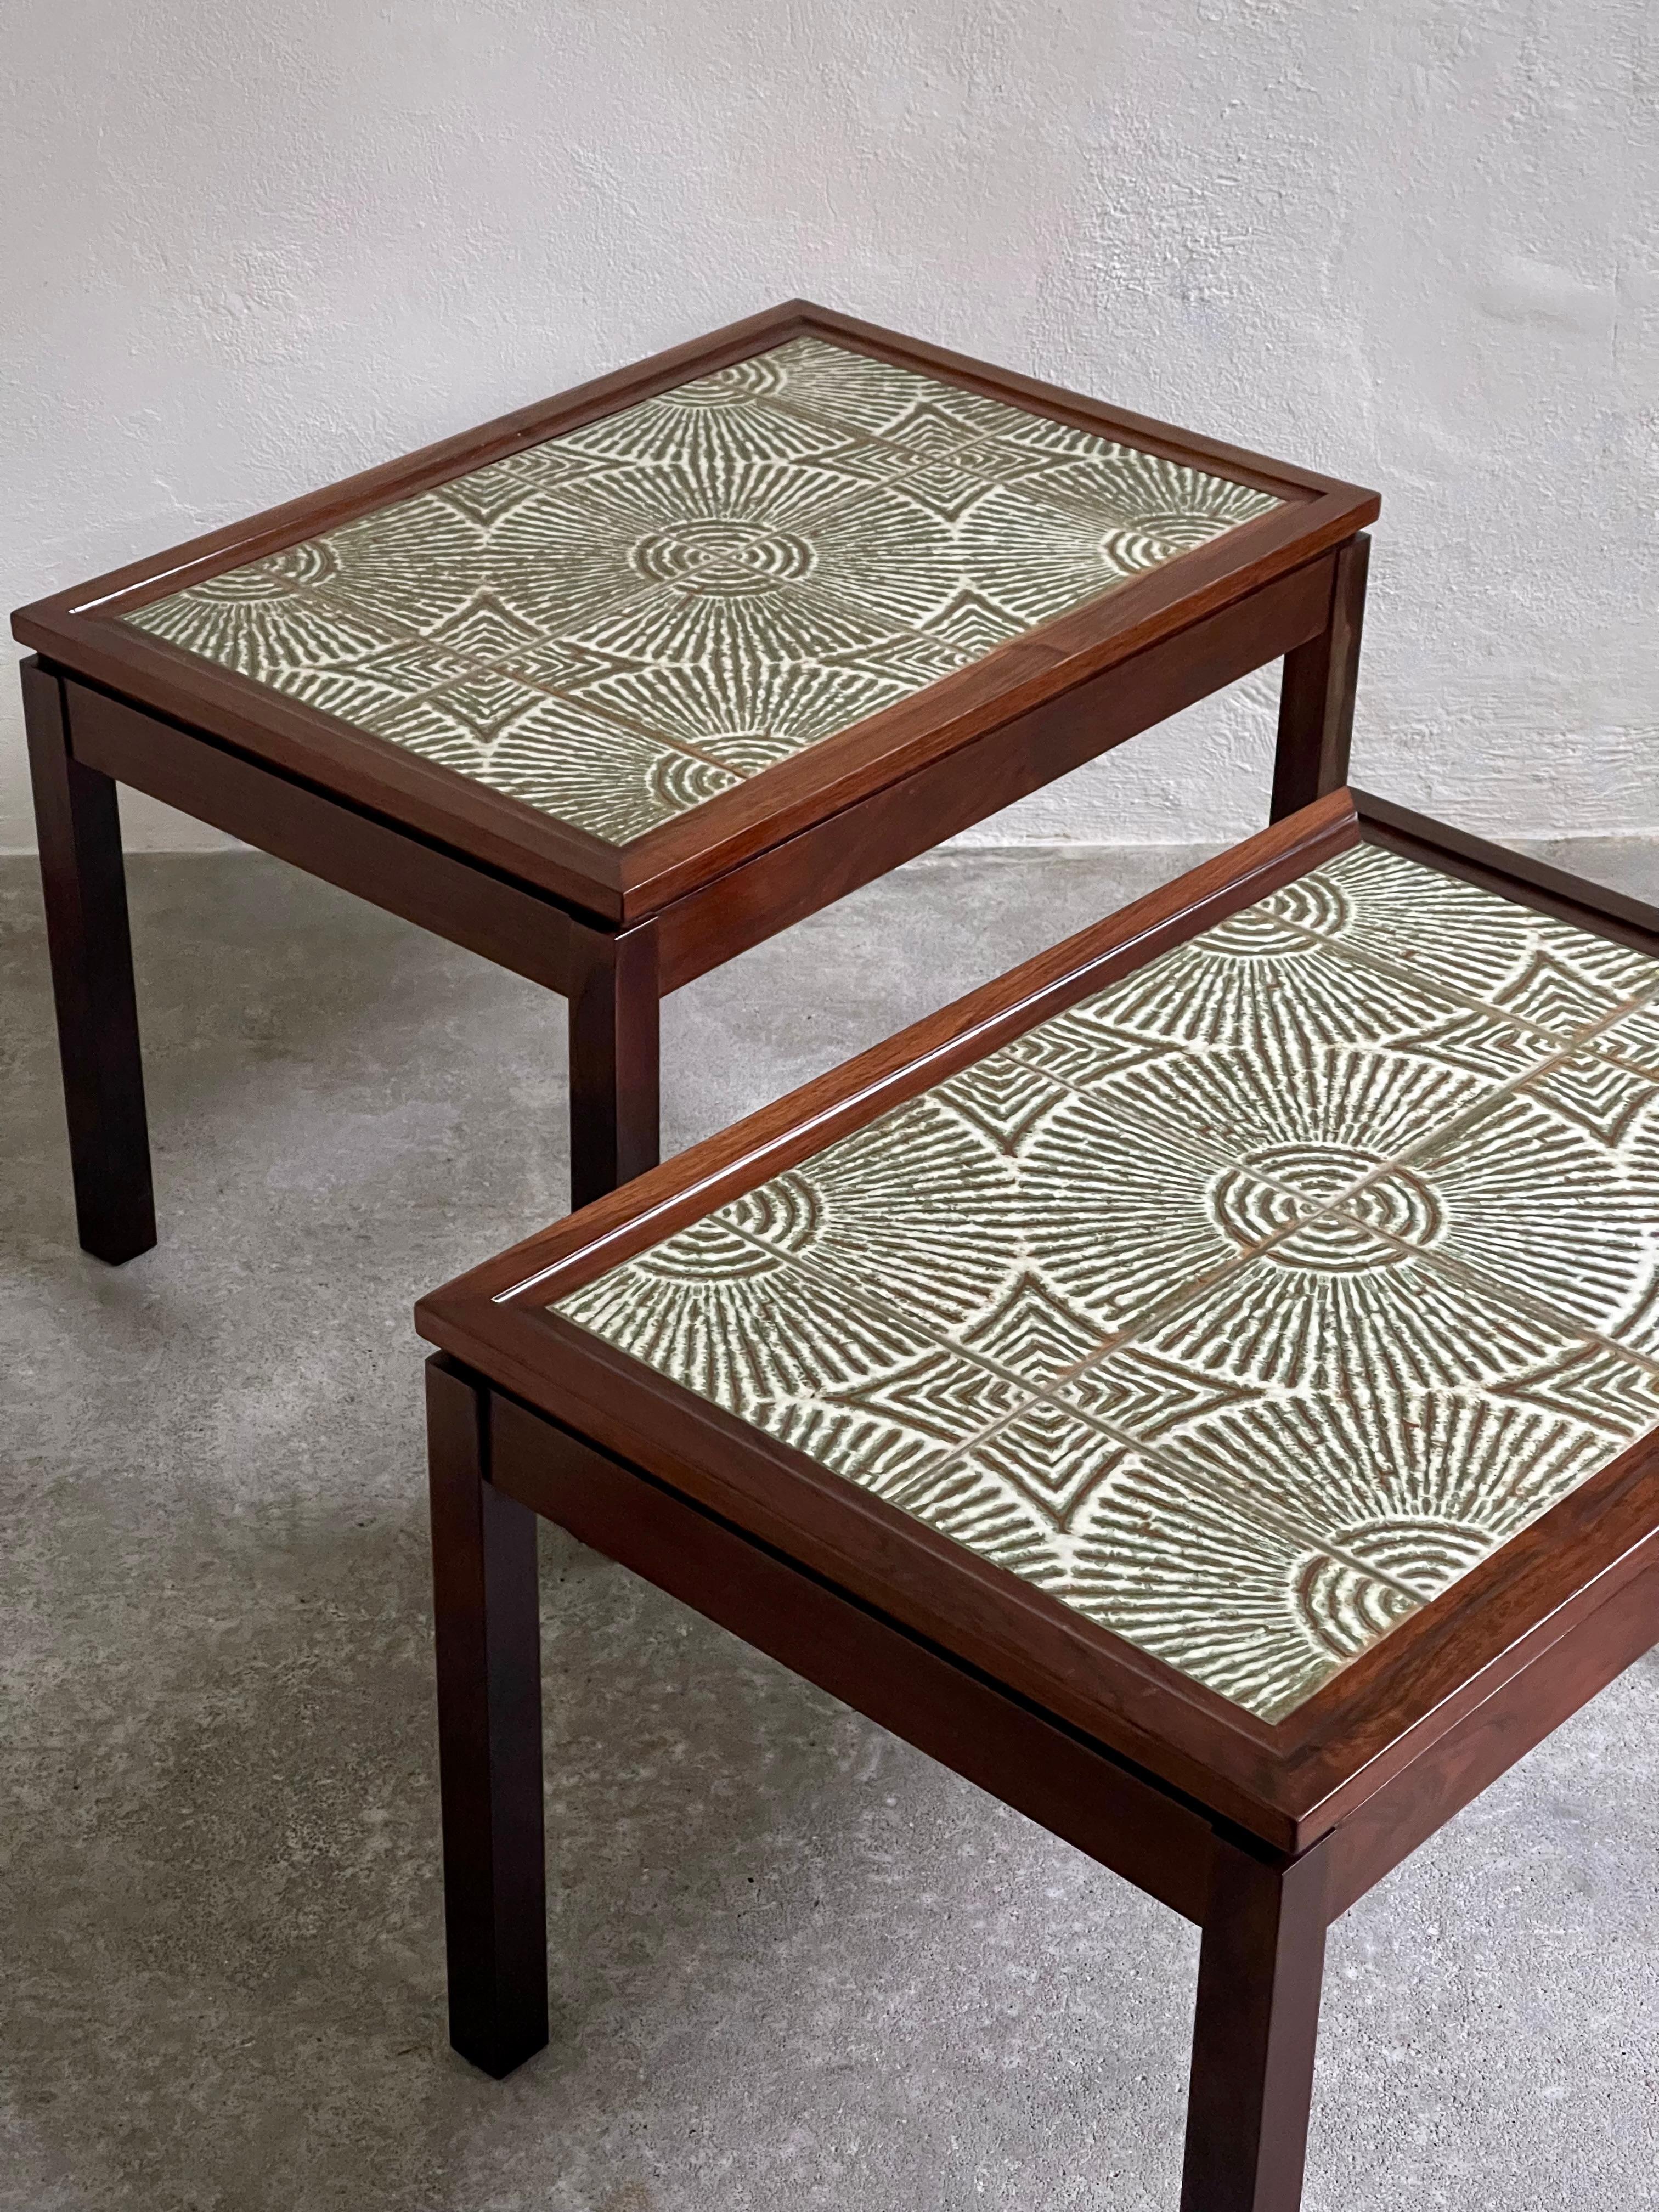 Pair of 1960s Danish Side Tables with ceramic tile table top by Edmund Jørgensen For Sale 3